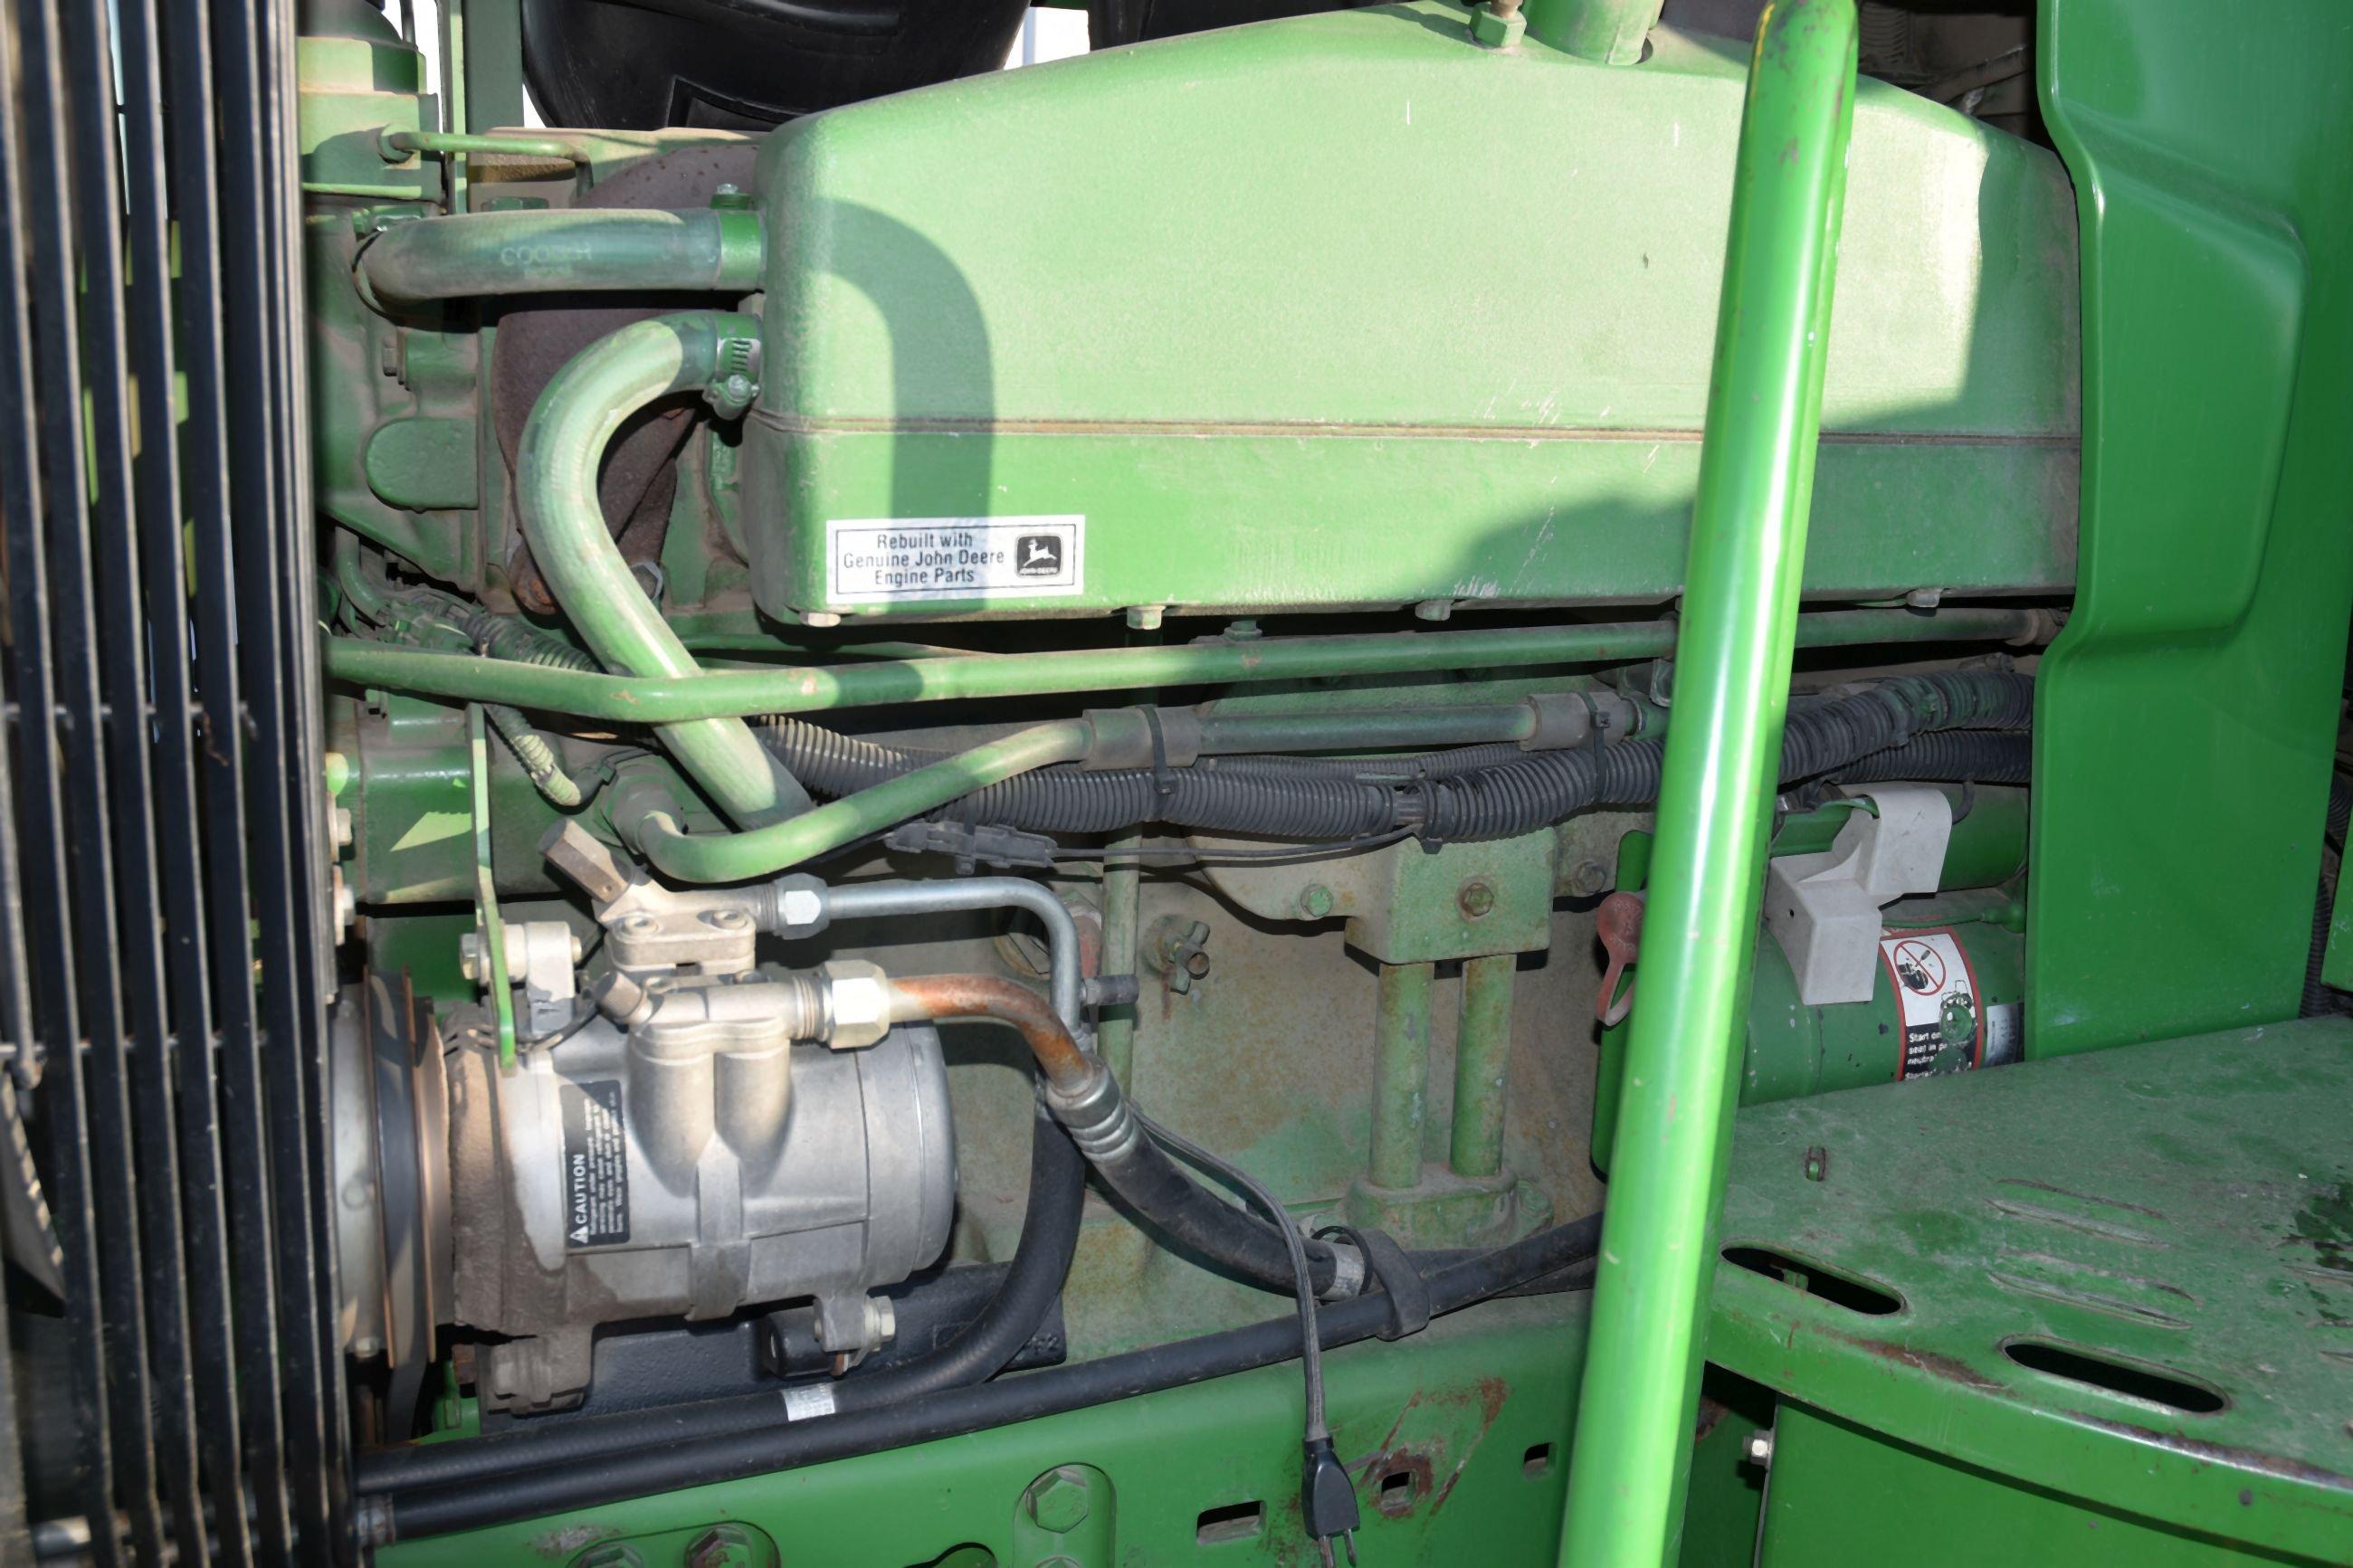 1993 John Deere 4960 MFWD, 7373 Hours, Engine Overhauled At 6,299 Hours With Paperwork Spent